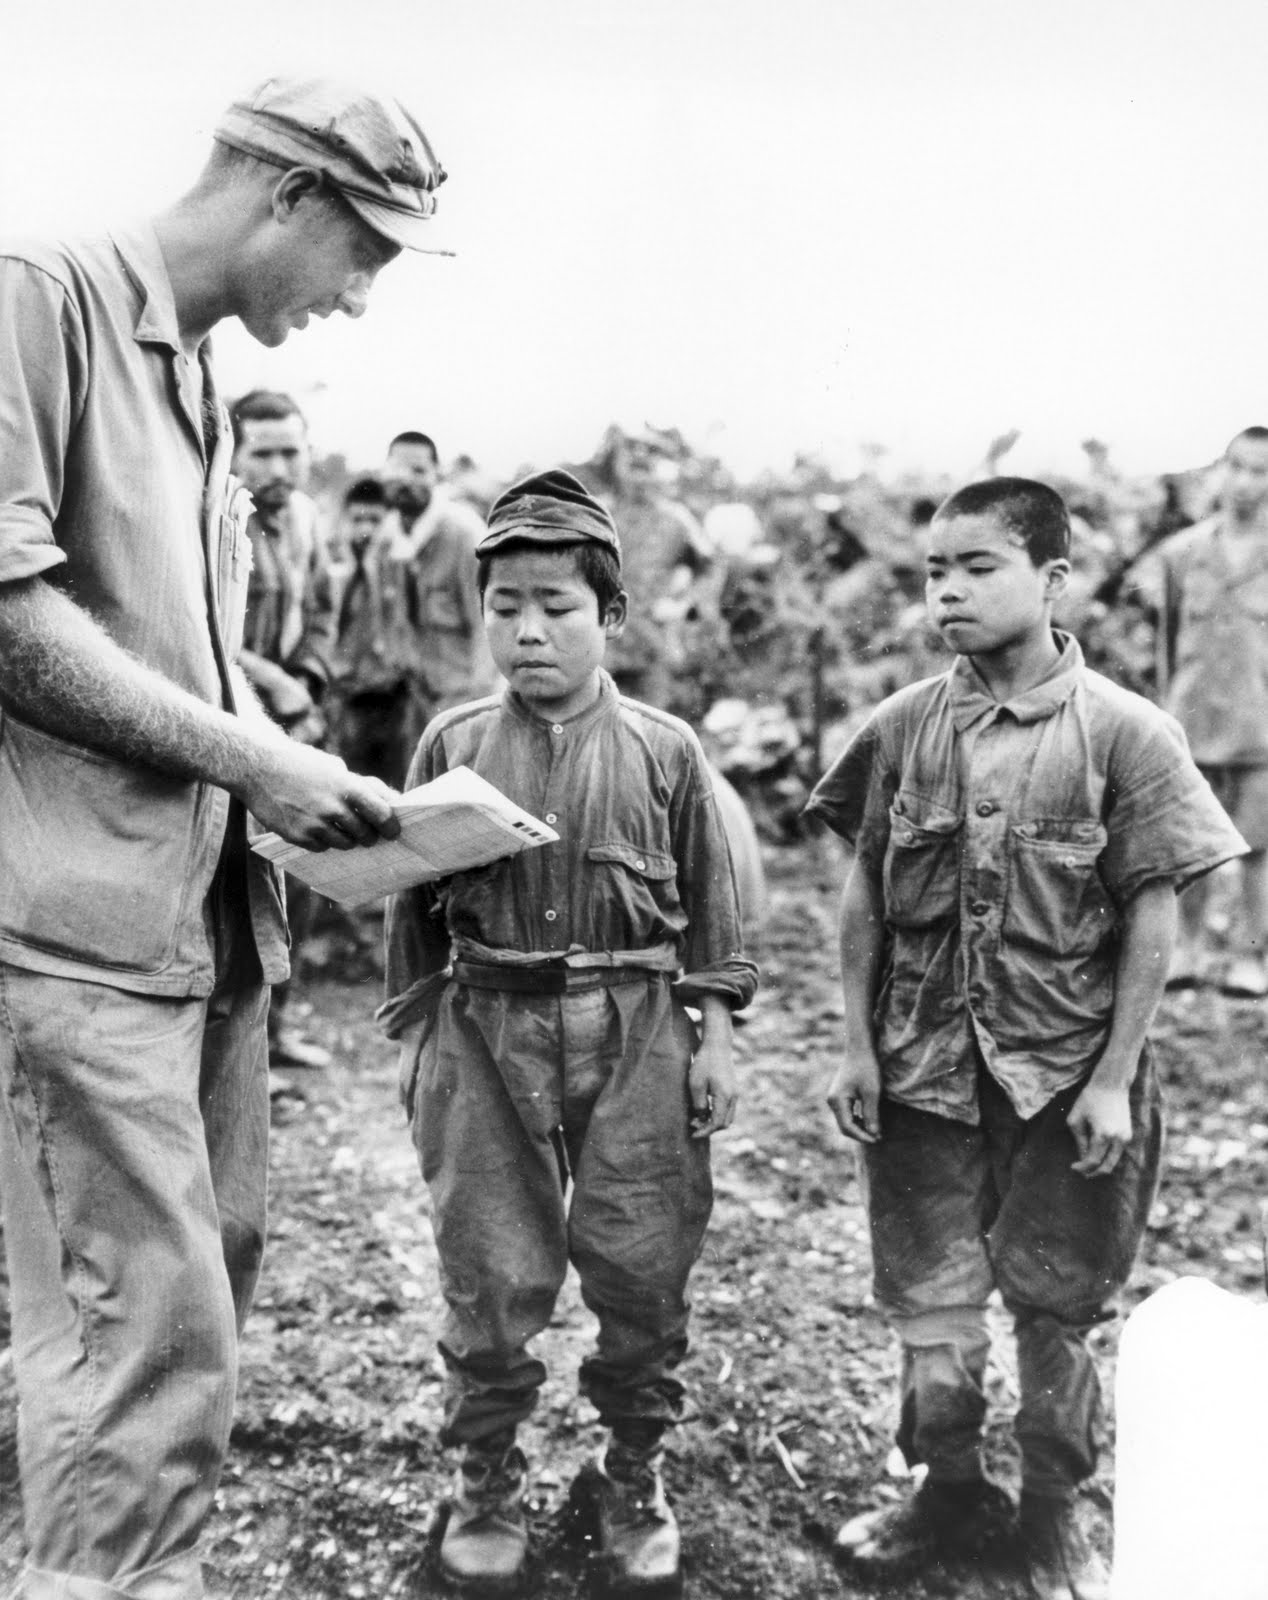 An American Marine tries to communicate with two Japanese child soldiers captured on Okinawa, June 1945